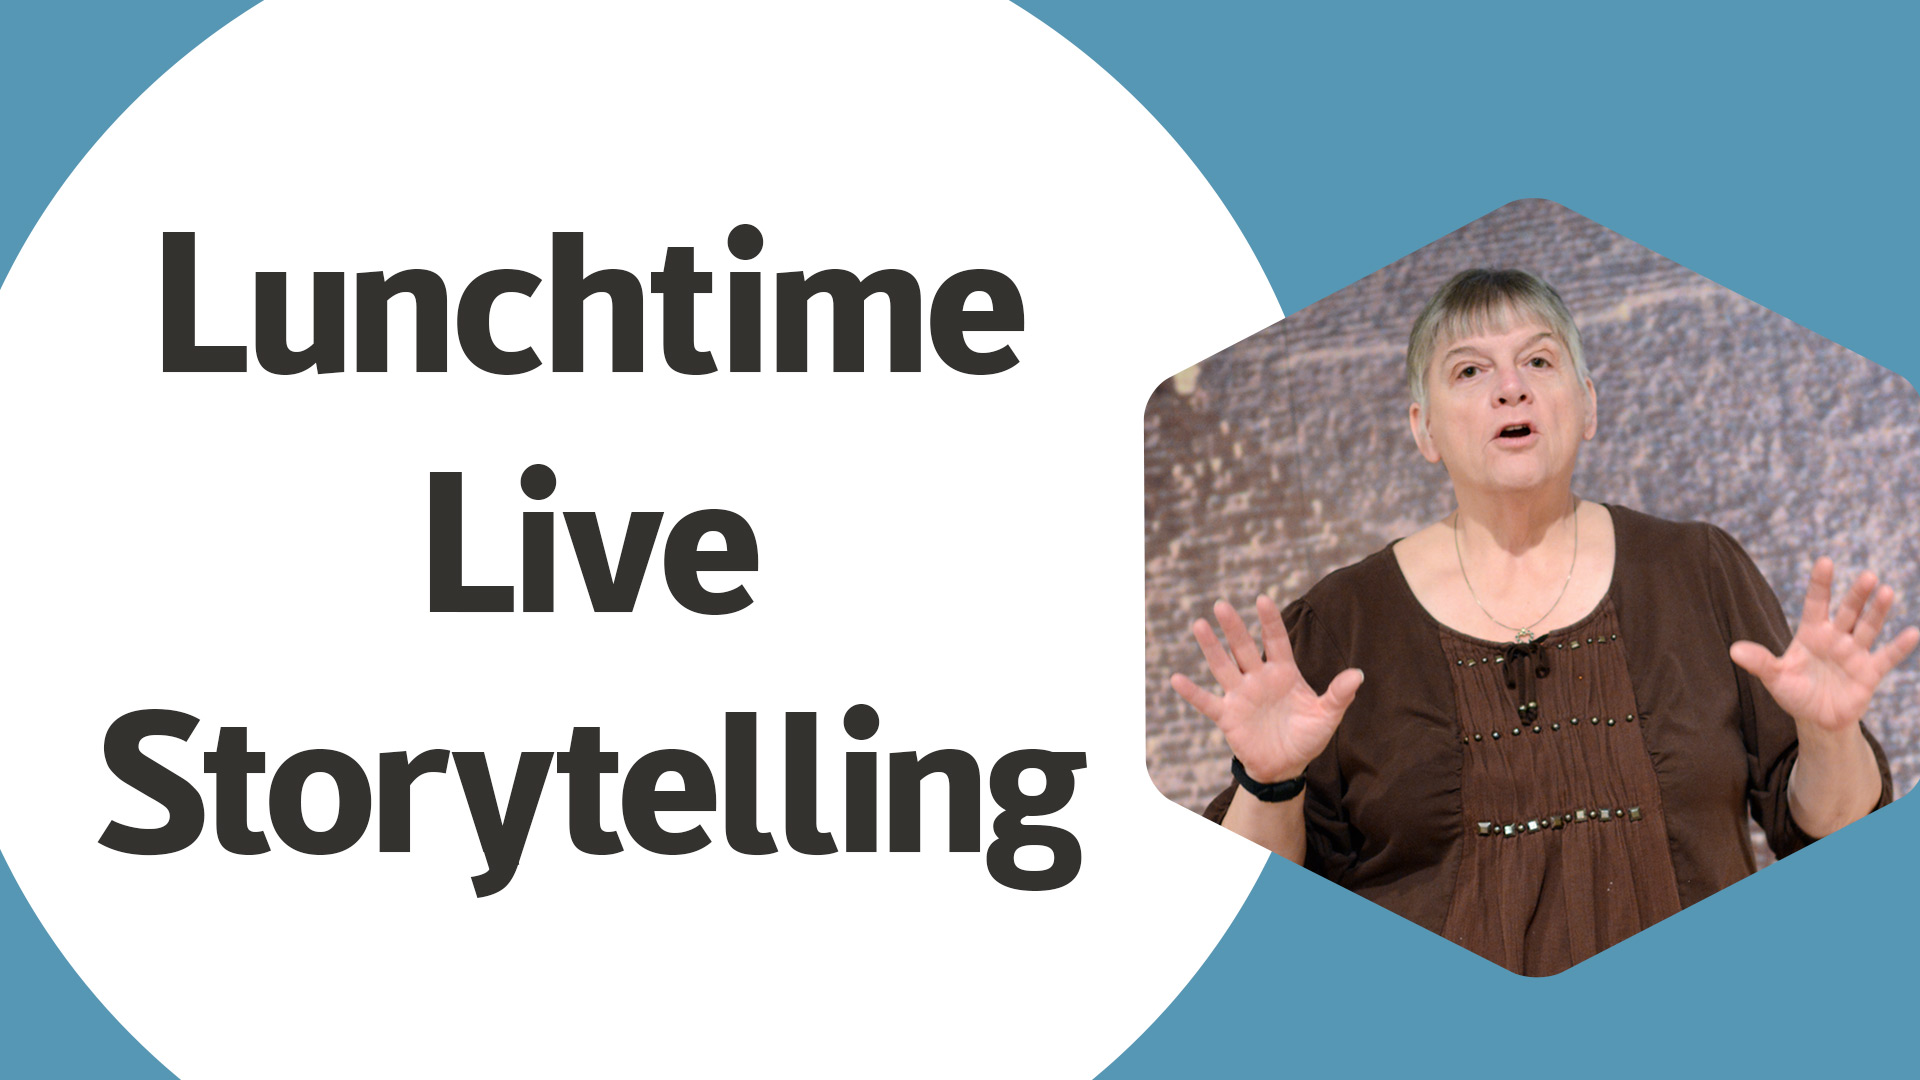 Lunchtime Live Storytelling with woman holding hands up and telling a story to the camera